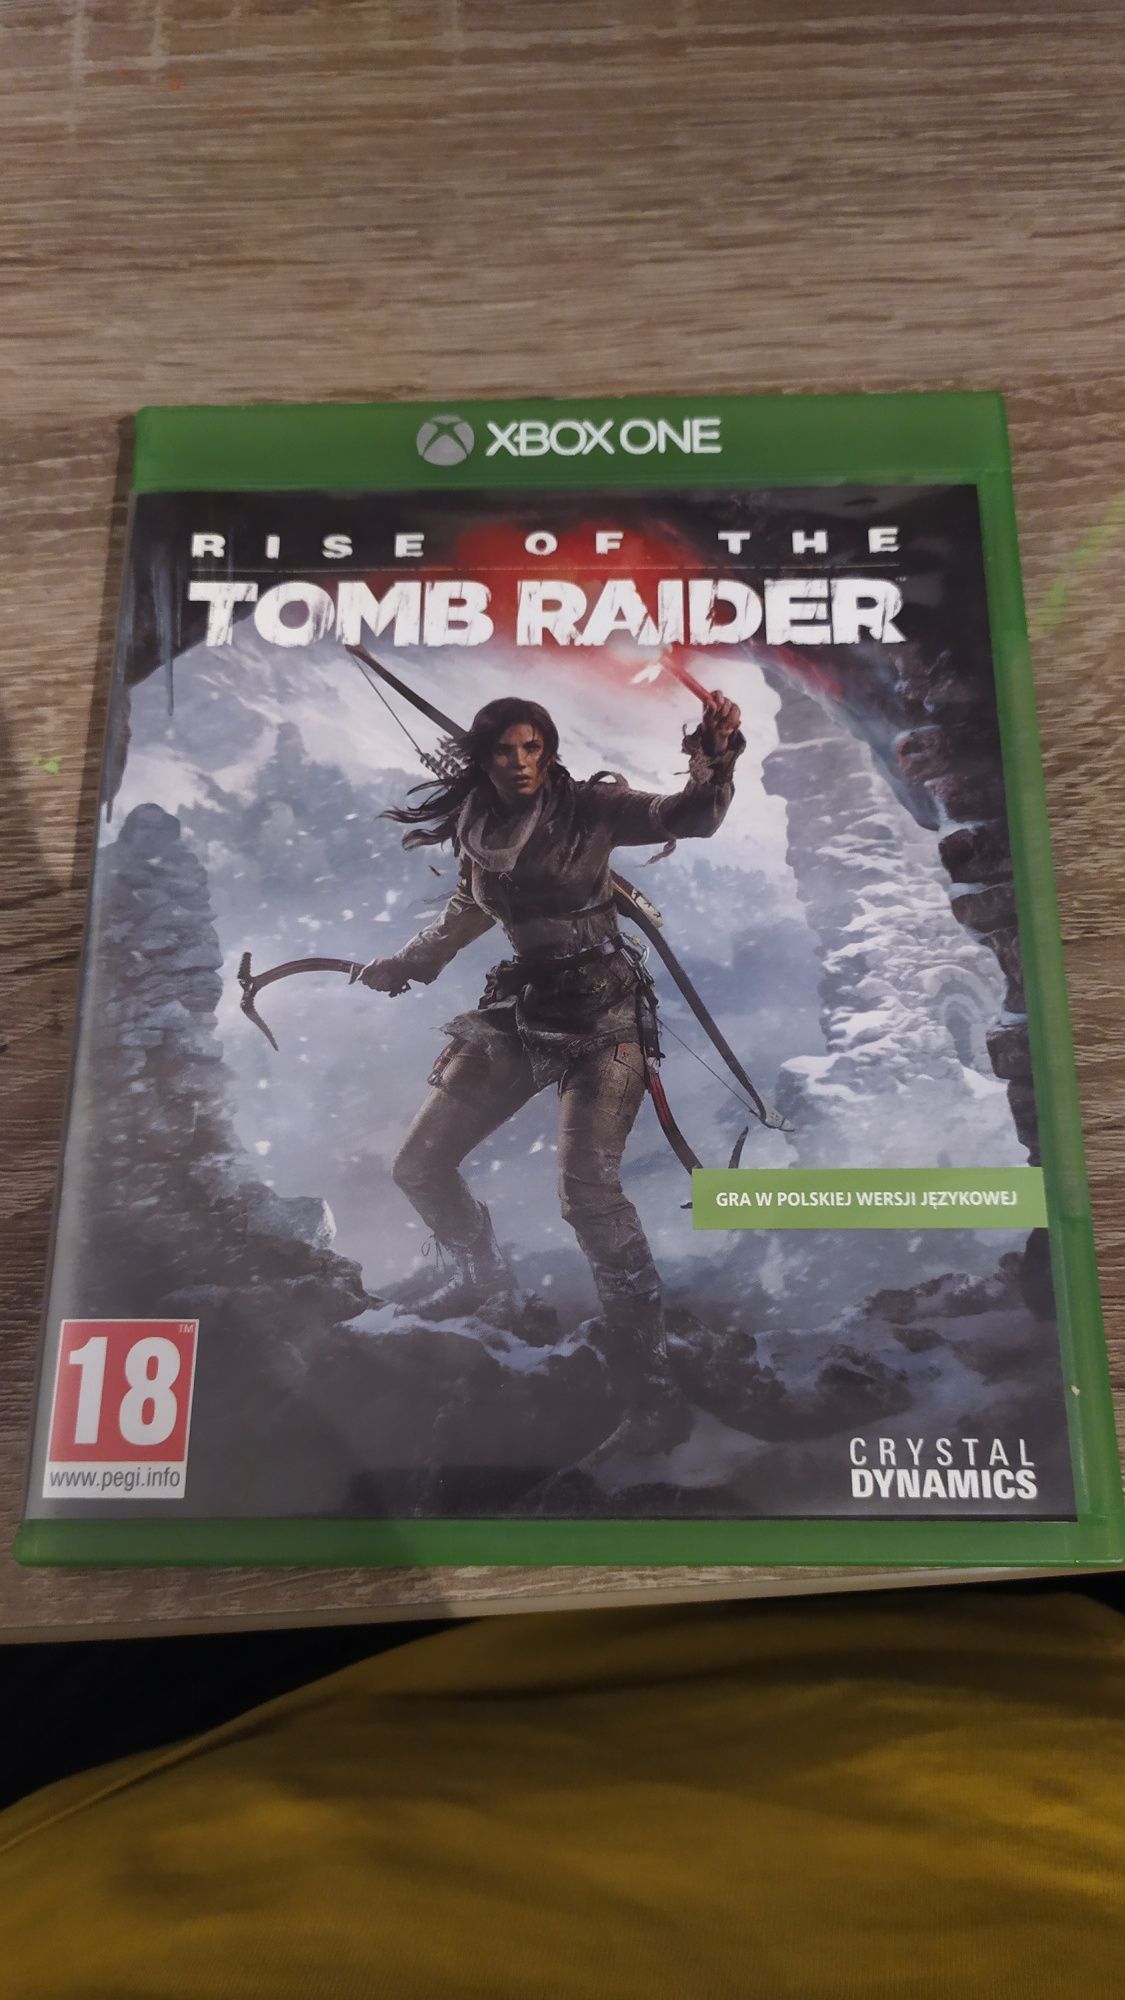 Rose of the Tomb Raider xbox one